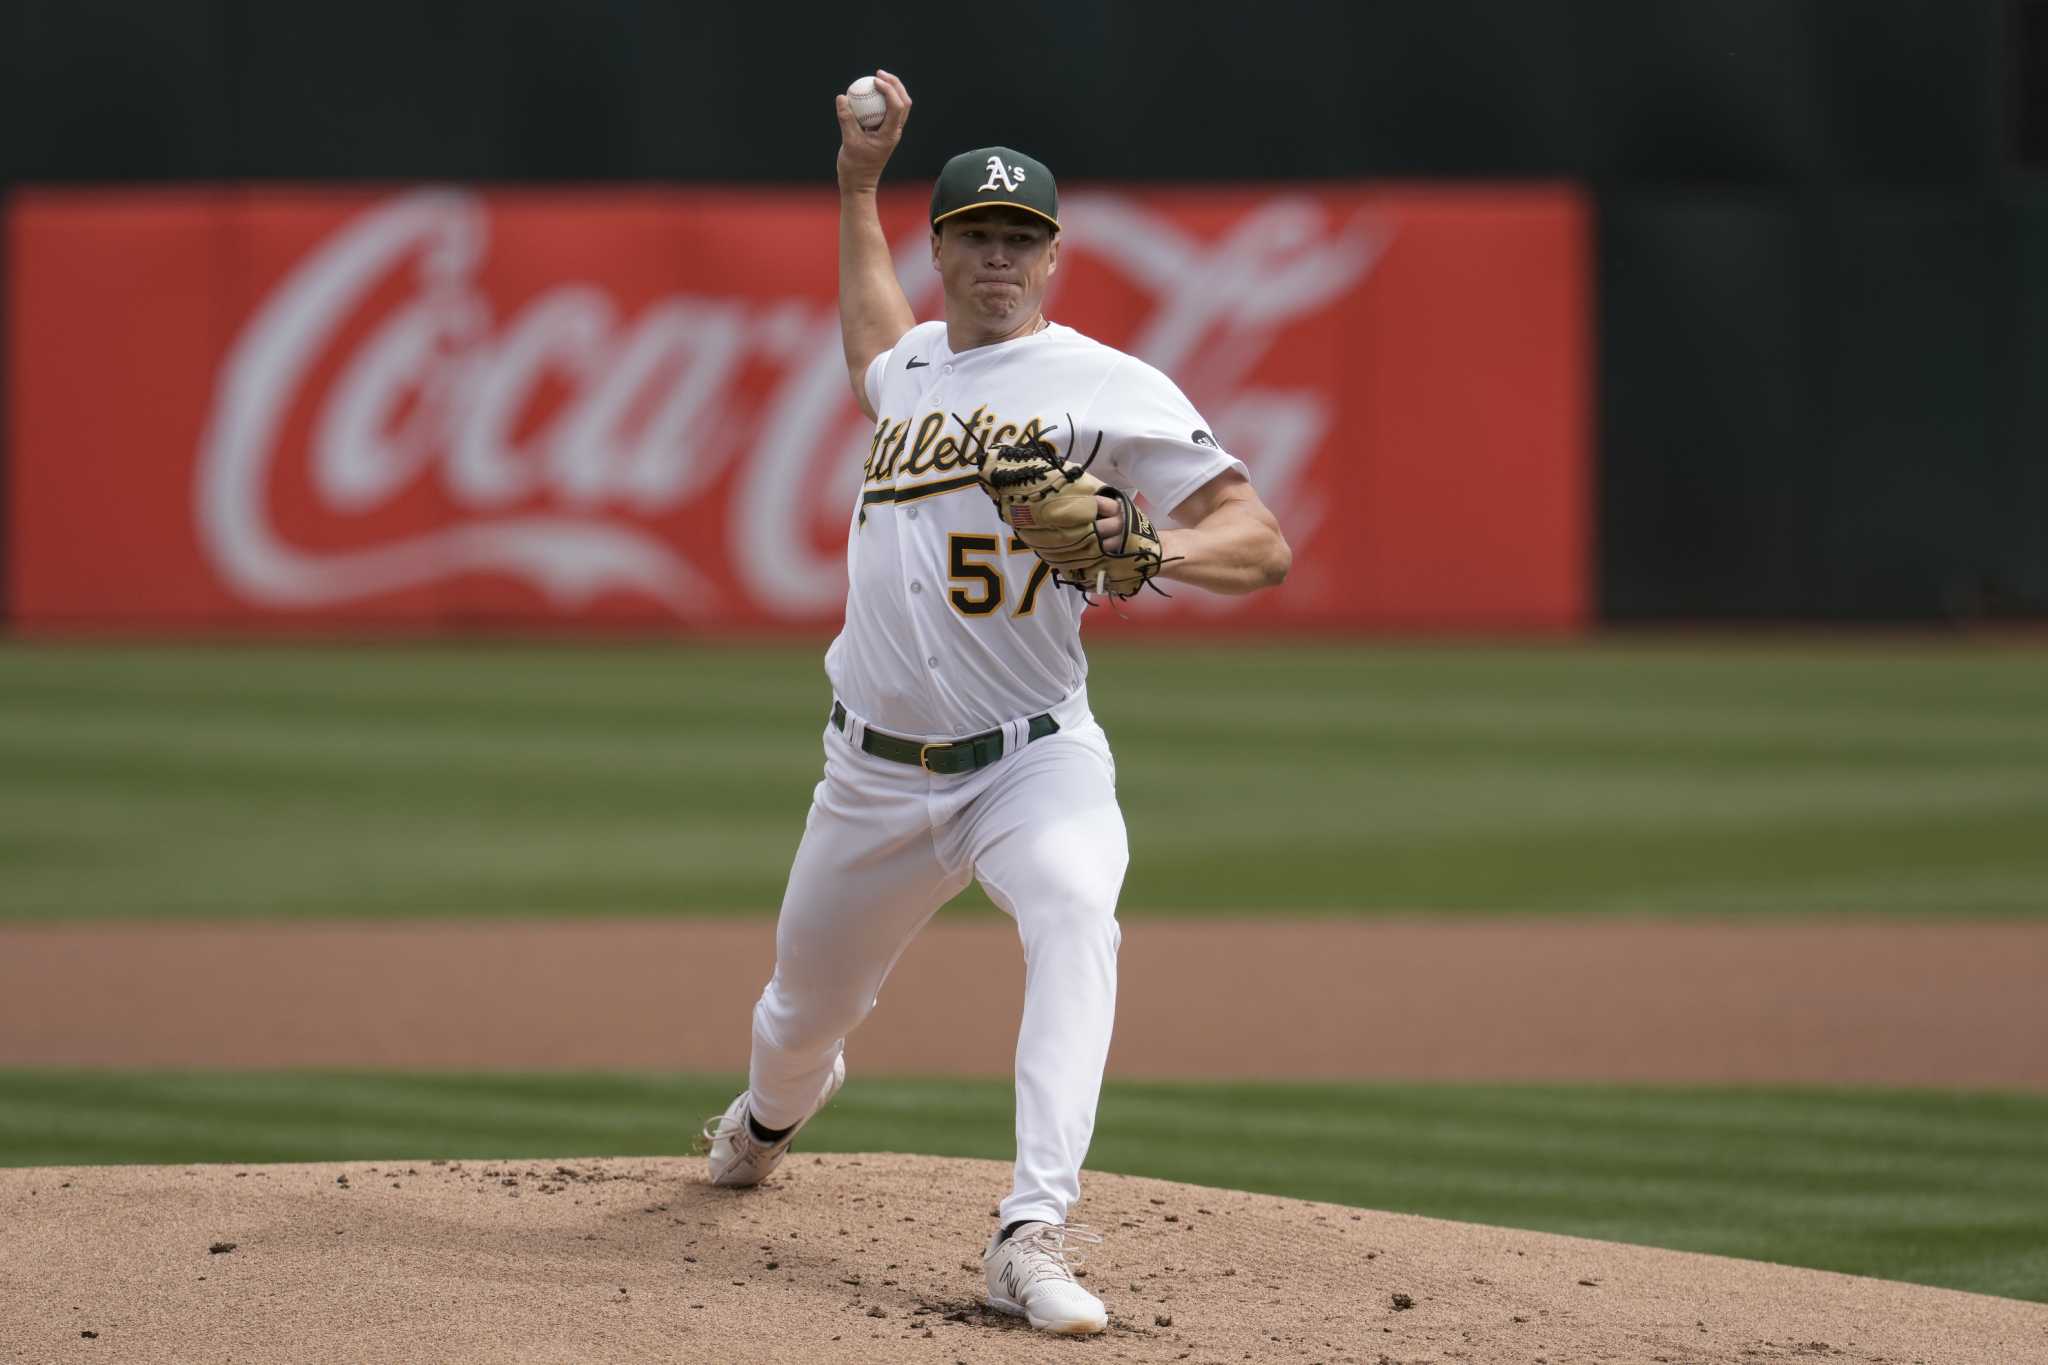 Guys are getting traded right in front of us': A's react to